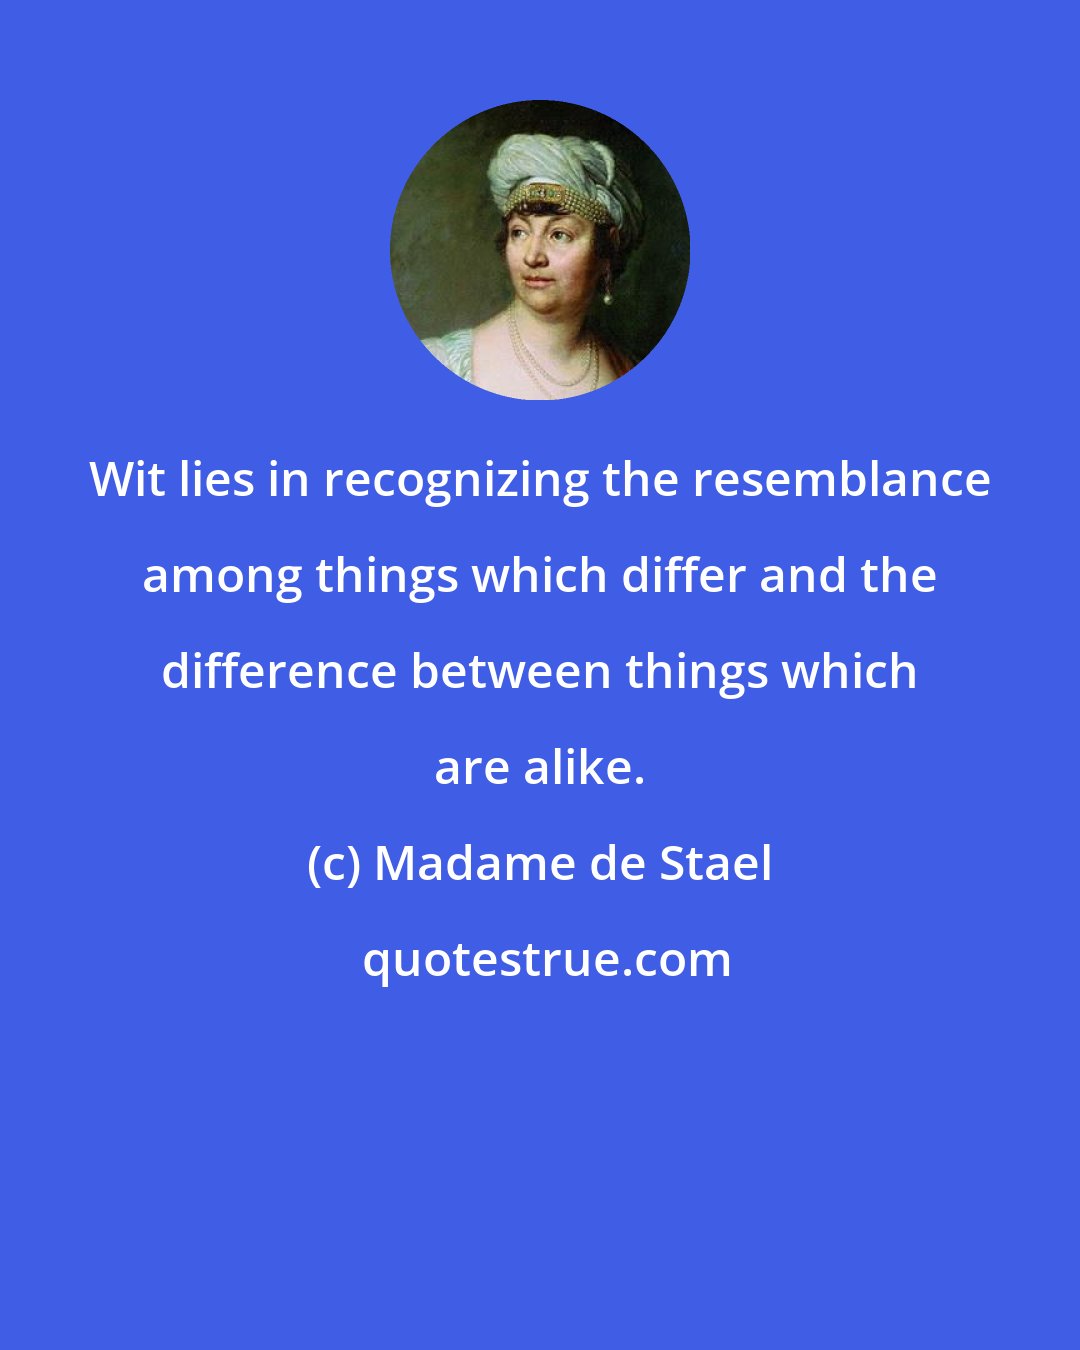 Madame de Stael: Wit lies in recognizing the resemblance among things which differ and the difference between things which are alike.